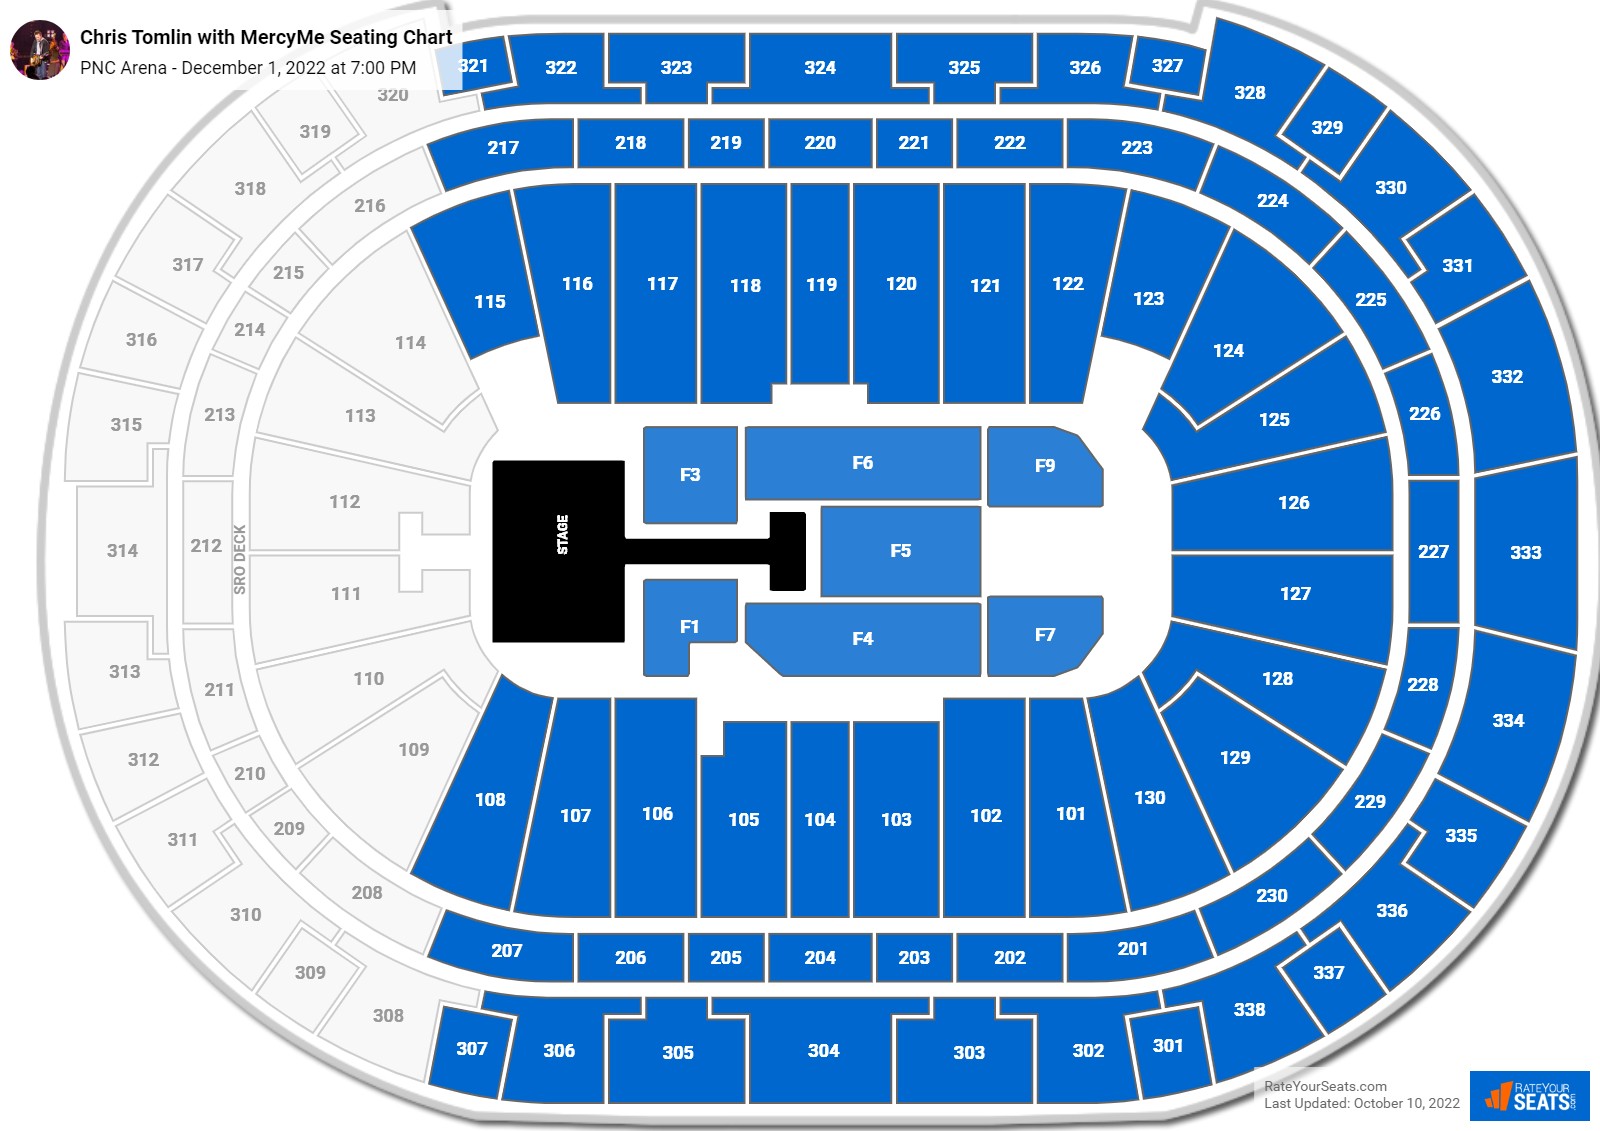 PNC Arena Concert Seating Chart - RateYourSeats.com